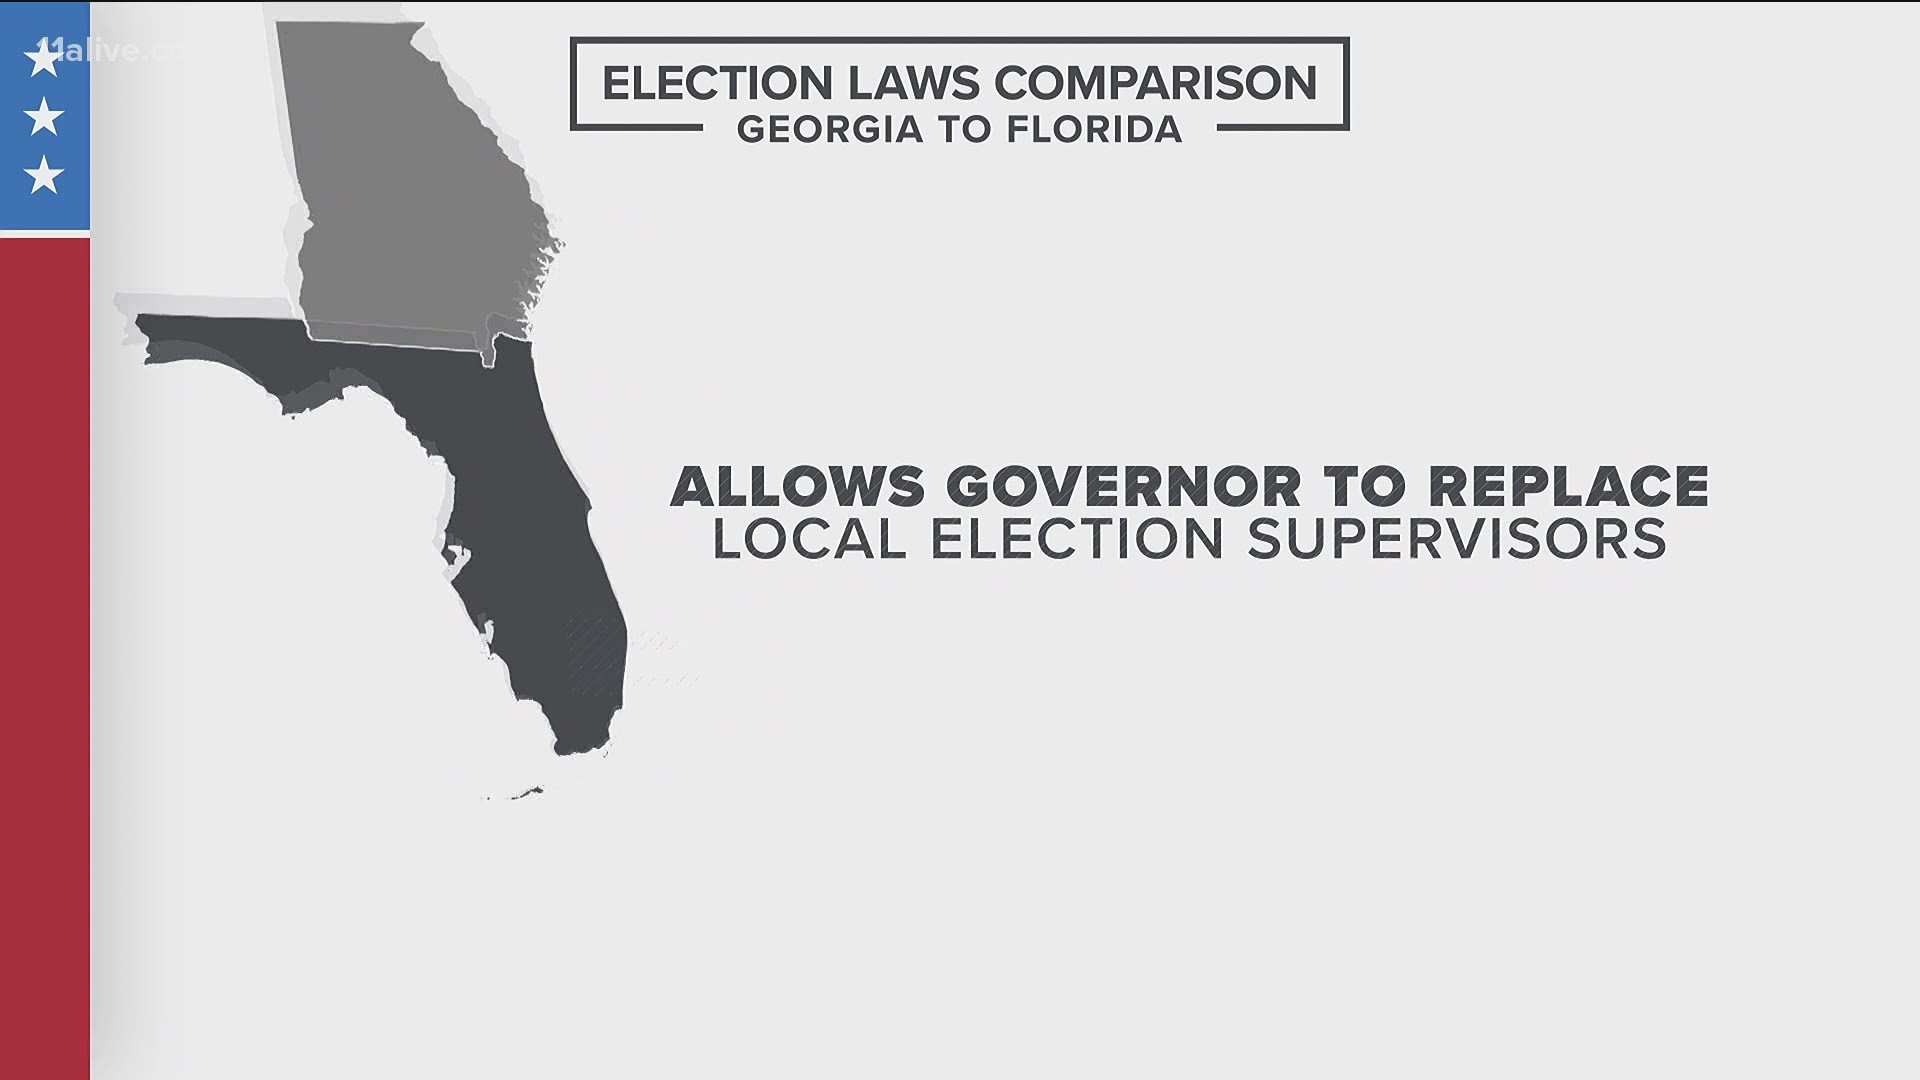 Florida allows the governor to replace elected local election supervisors.